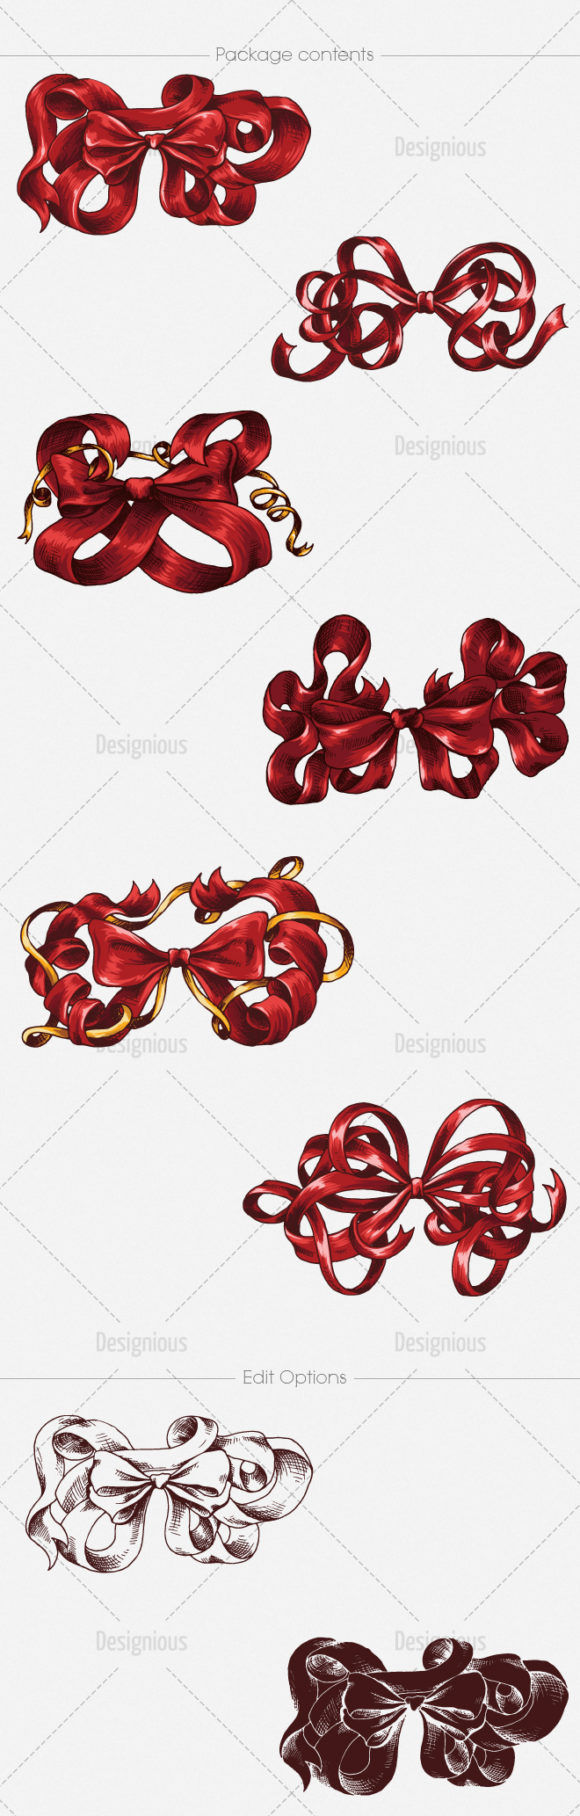 Christmas Vector Pack 18 2